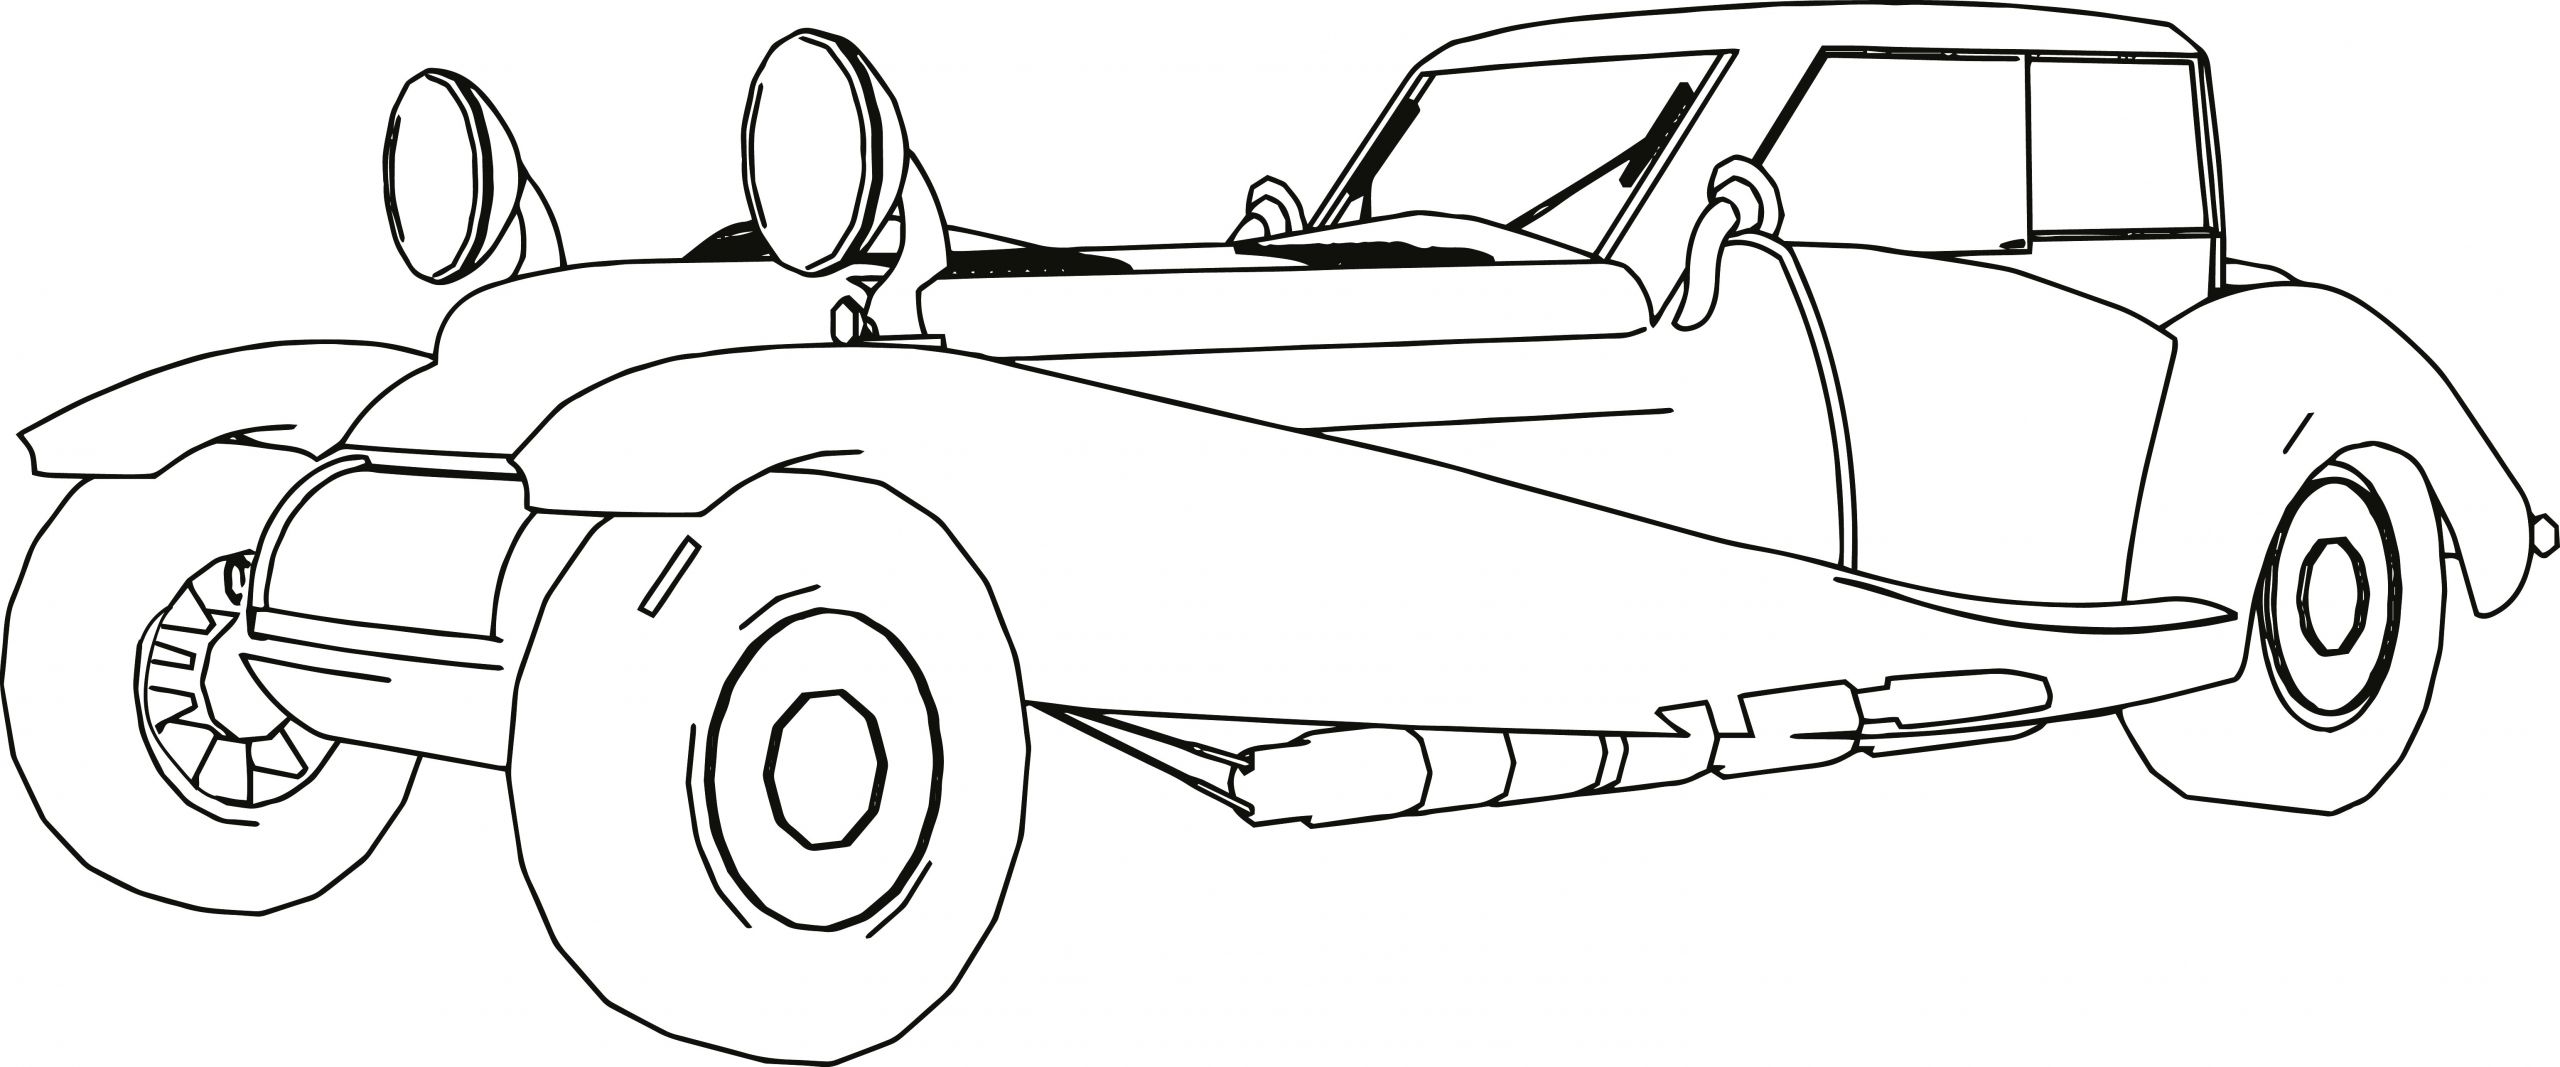 Easy Race Car Drawing 27 Unique Image Of Car Coloring Page to Print Crafted Here